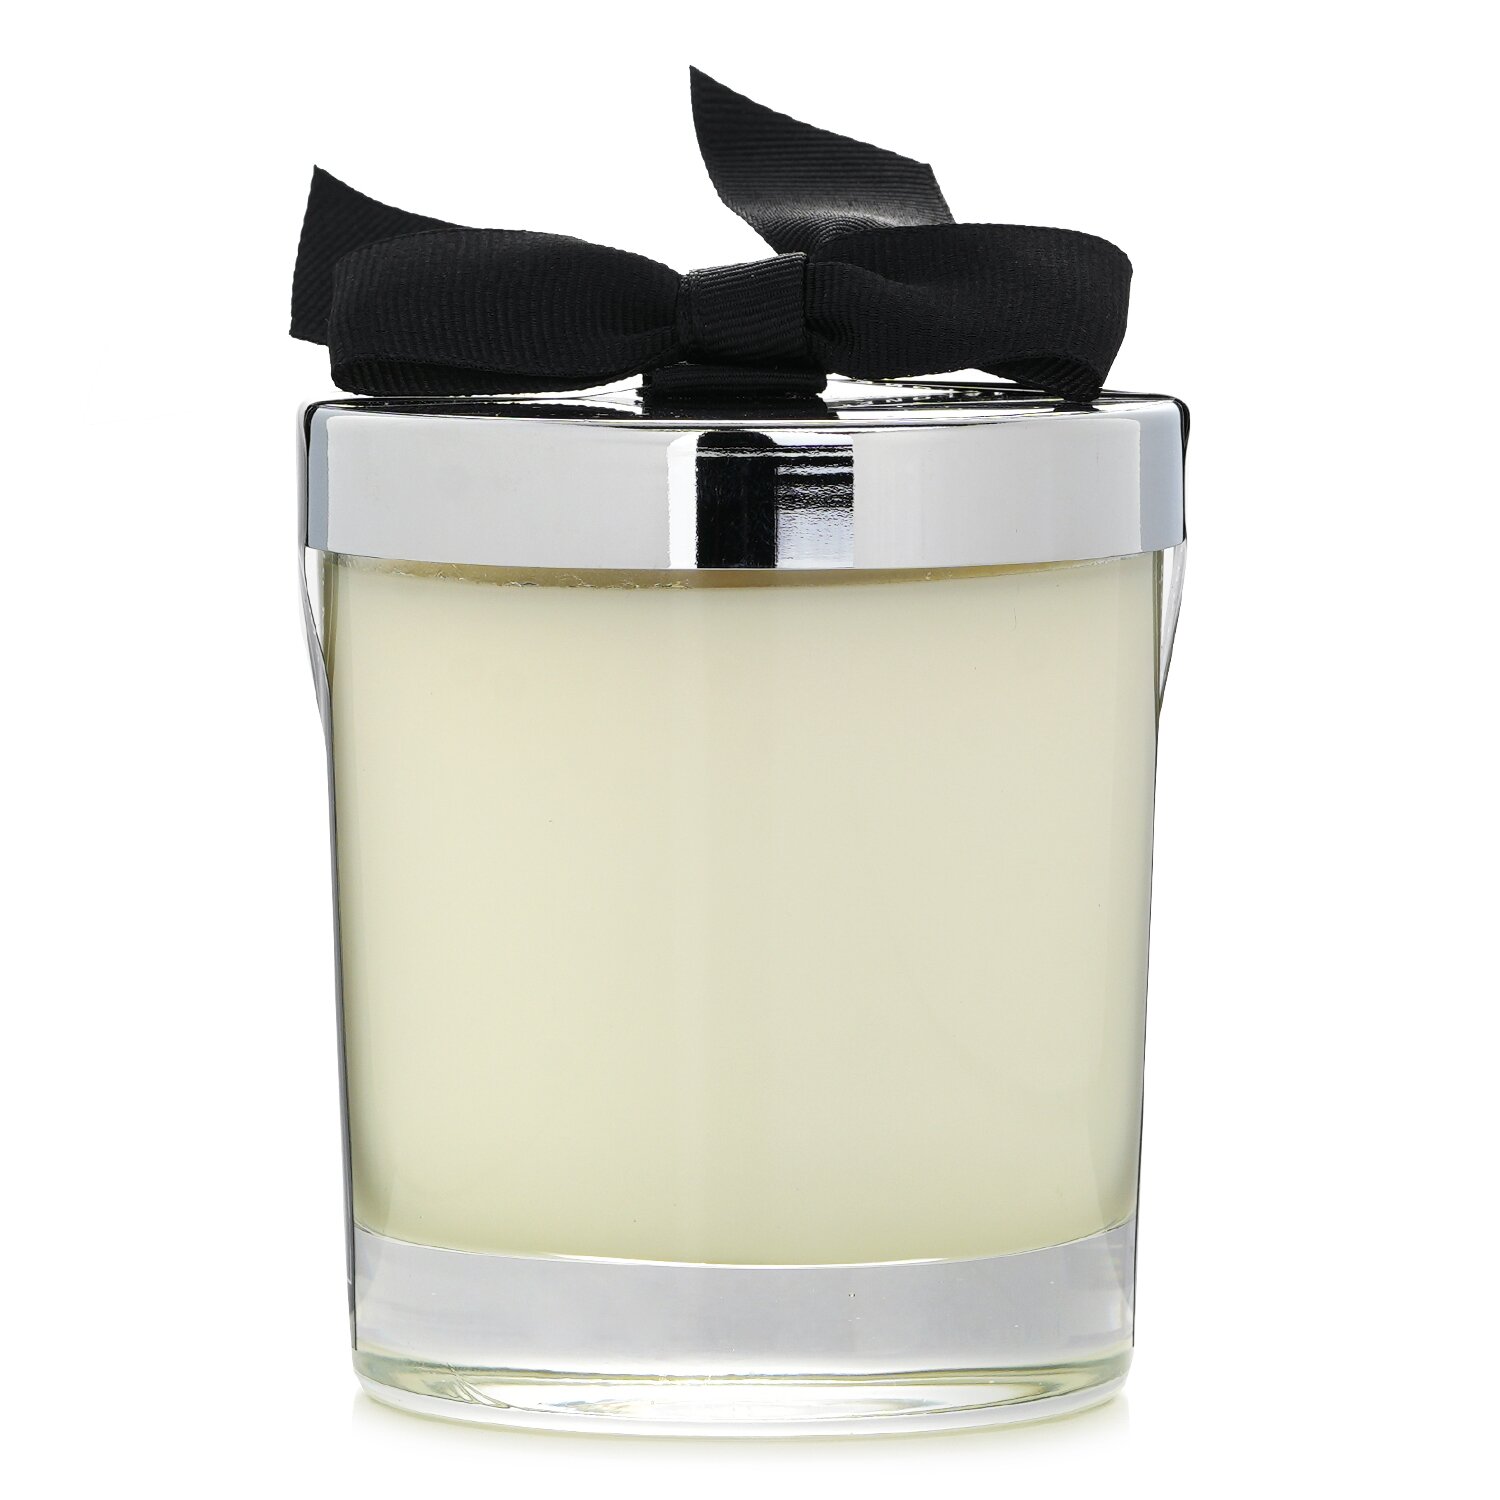 Jo Malone Peony & Blush Suede Scented Candle 200g (2.5 inch)